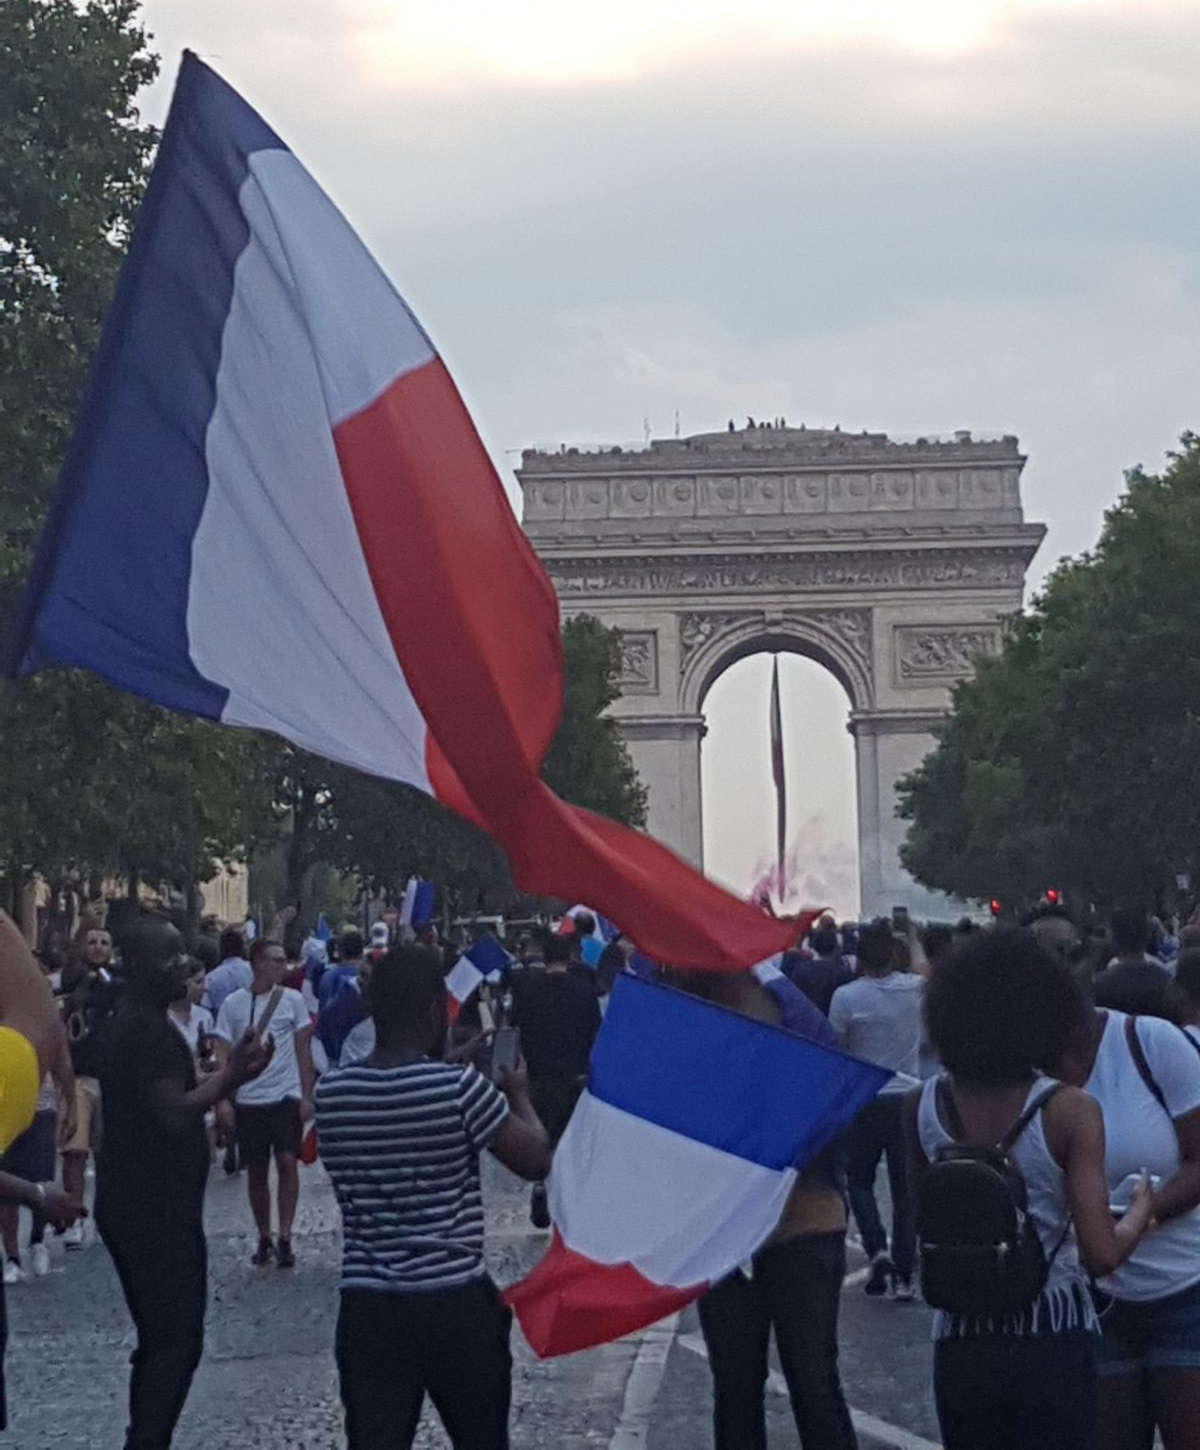 Large crowds nation-wide in France celebrate World Cup victory